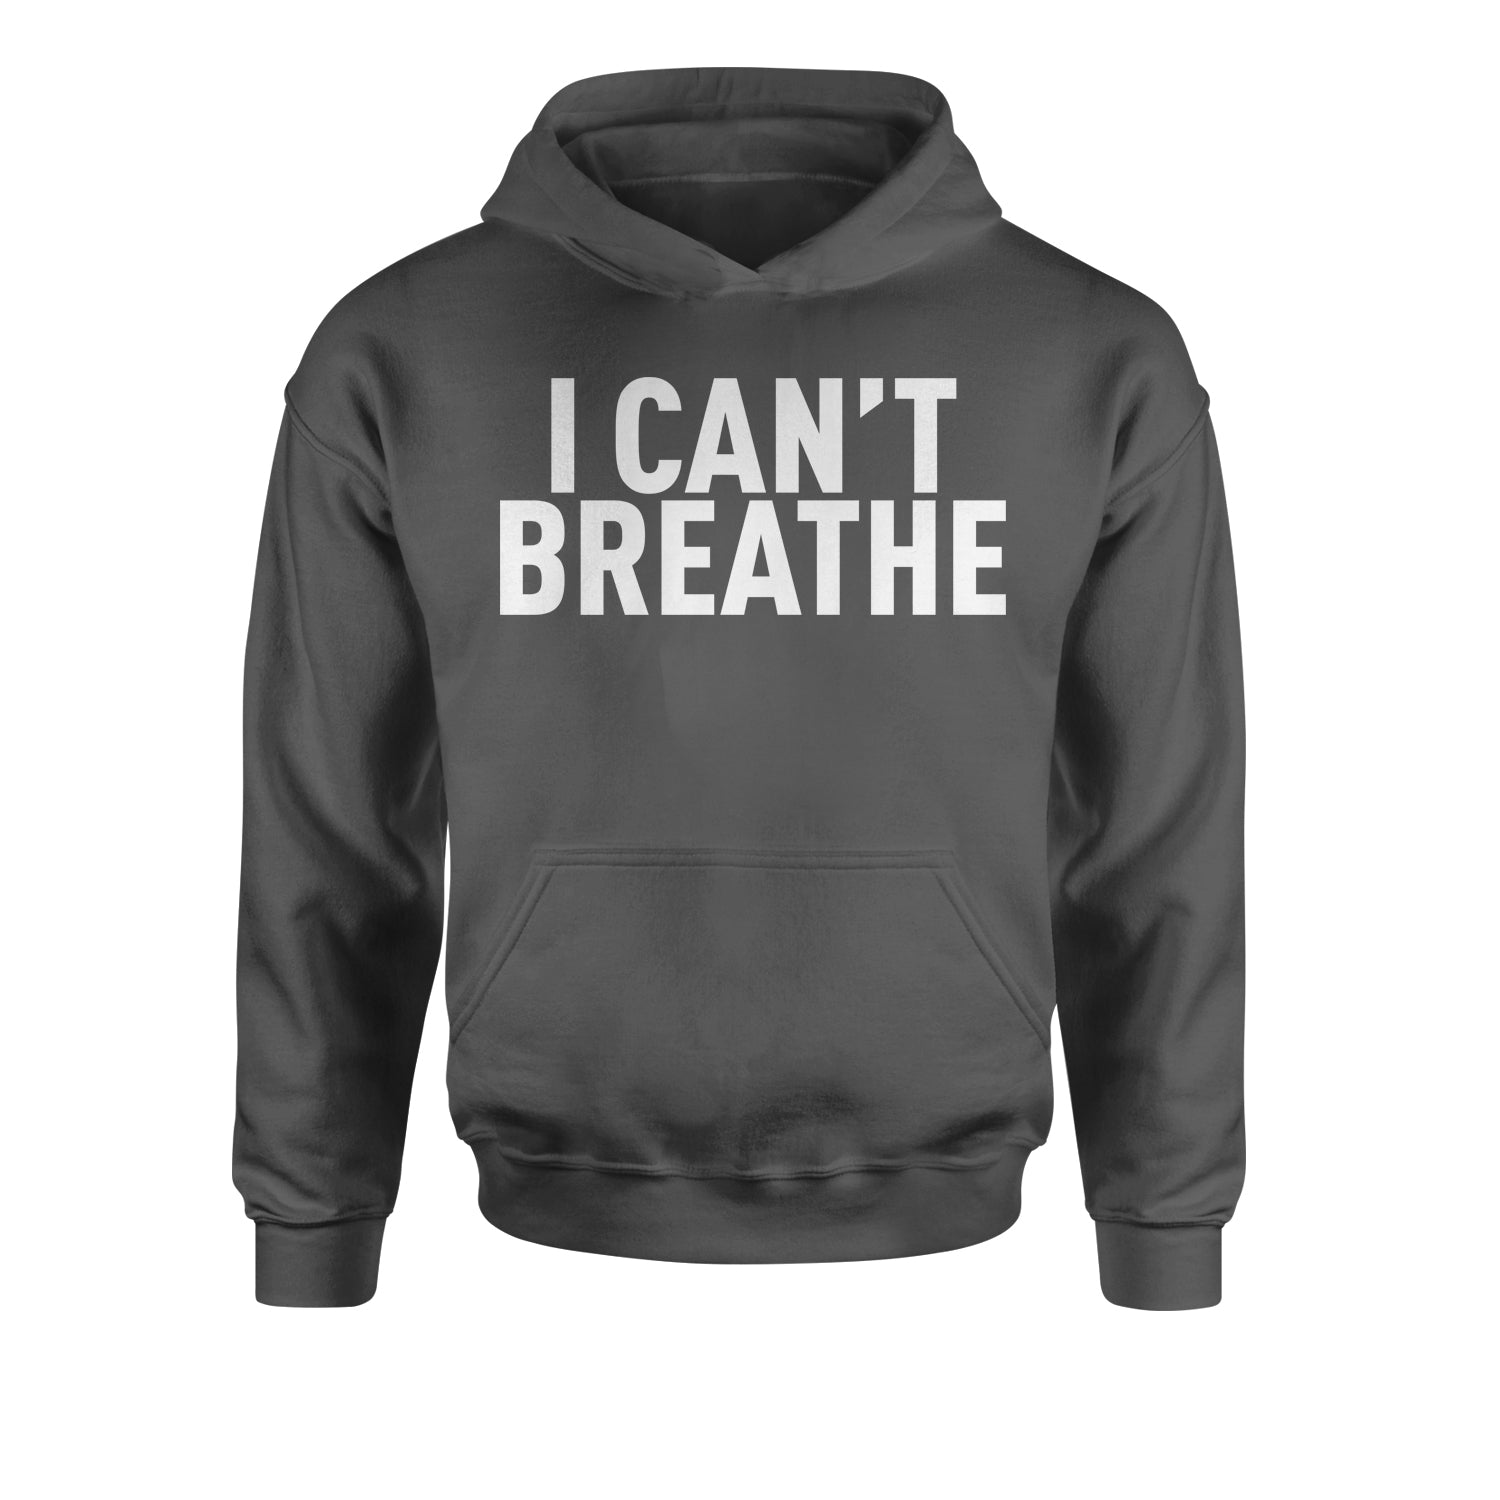 I Can't Breathe Social Justice Youth-Sized Hoodie african, africanamerican, american, black, blm, breonna, floyd, george, life, lives, matter, taylor by Expression Tees